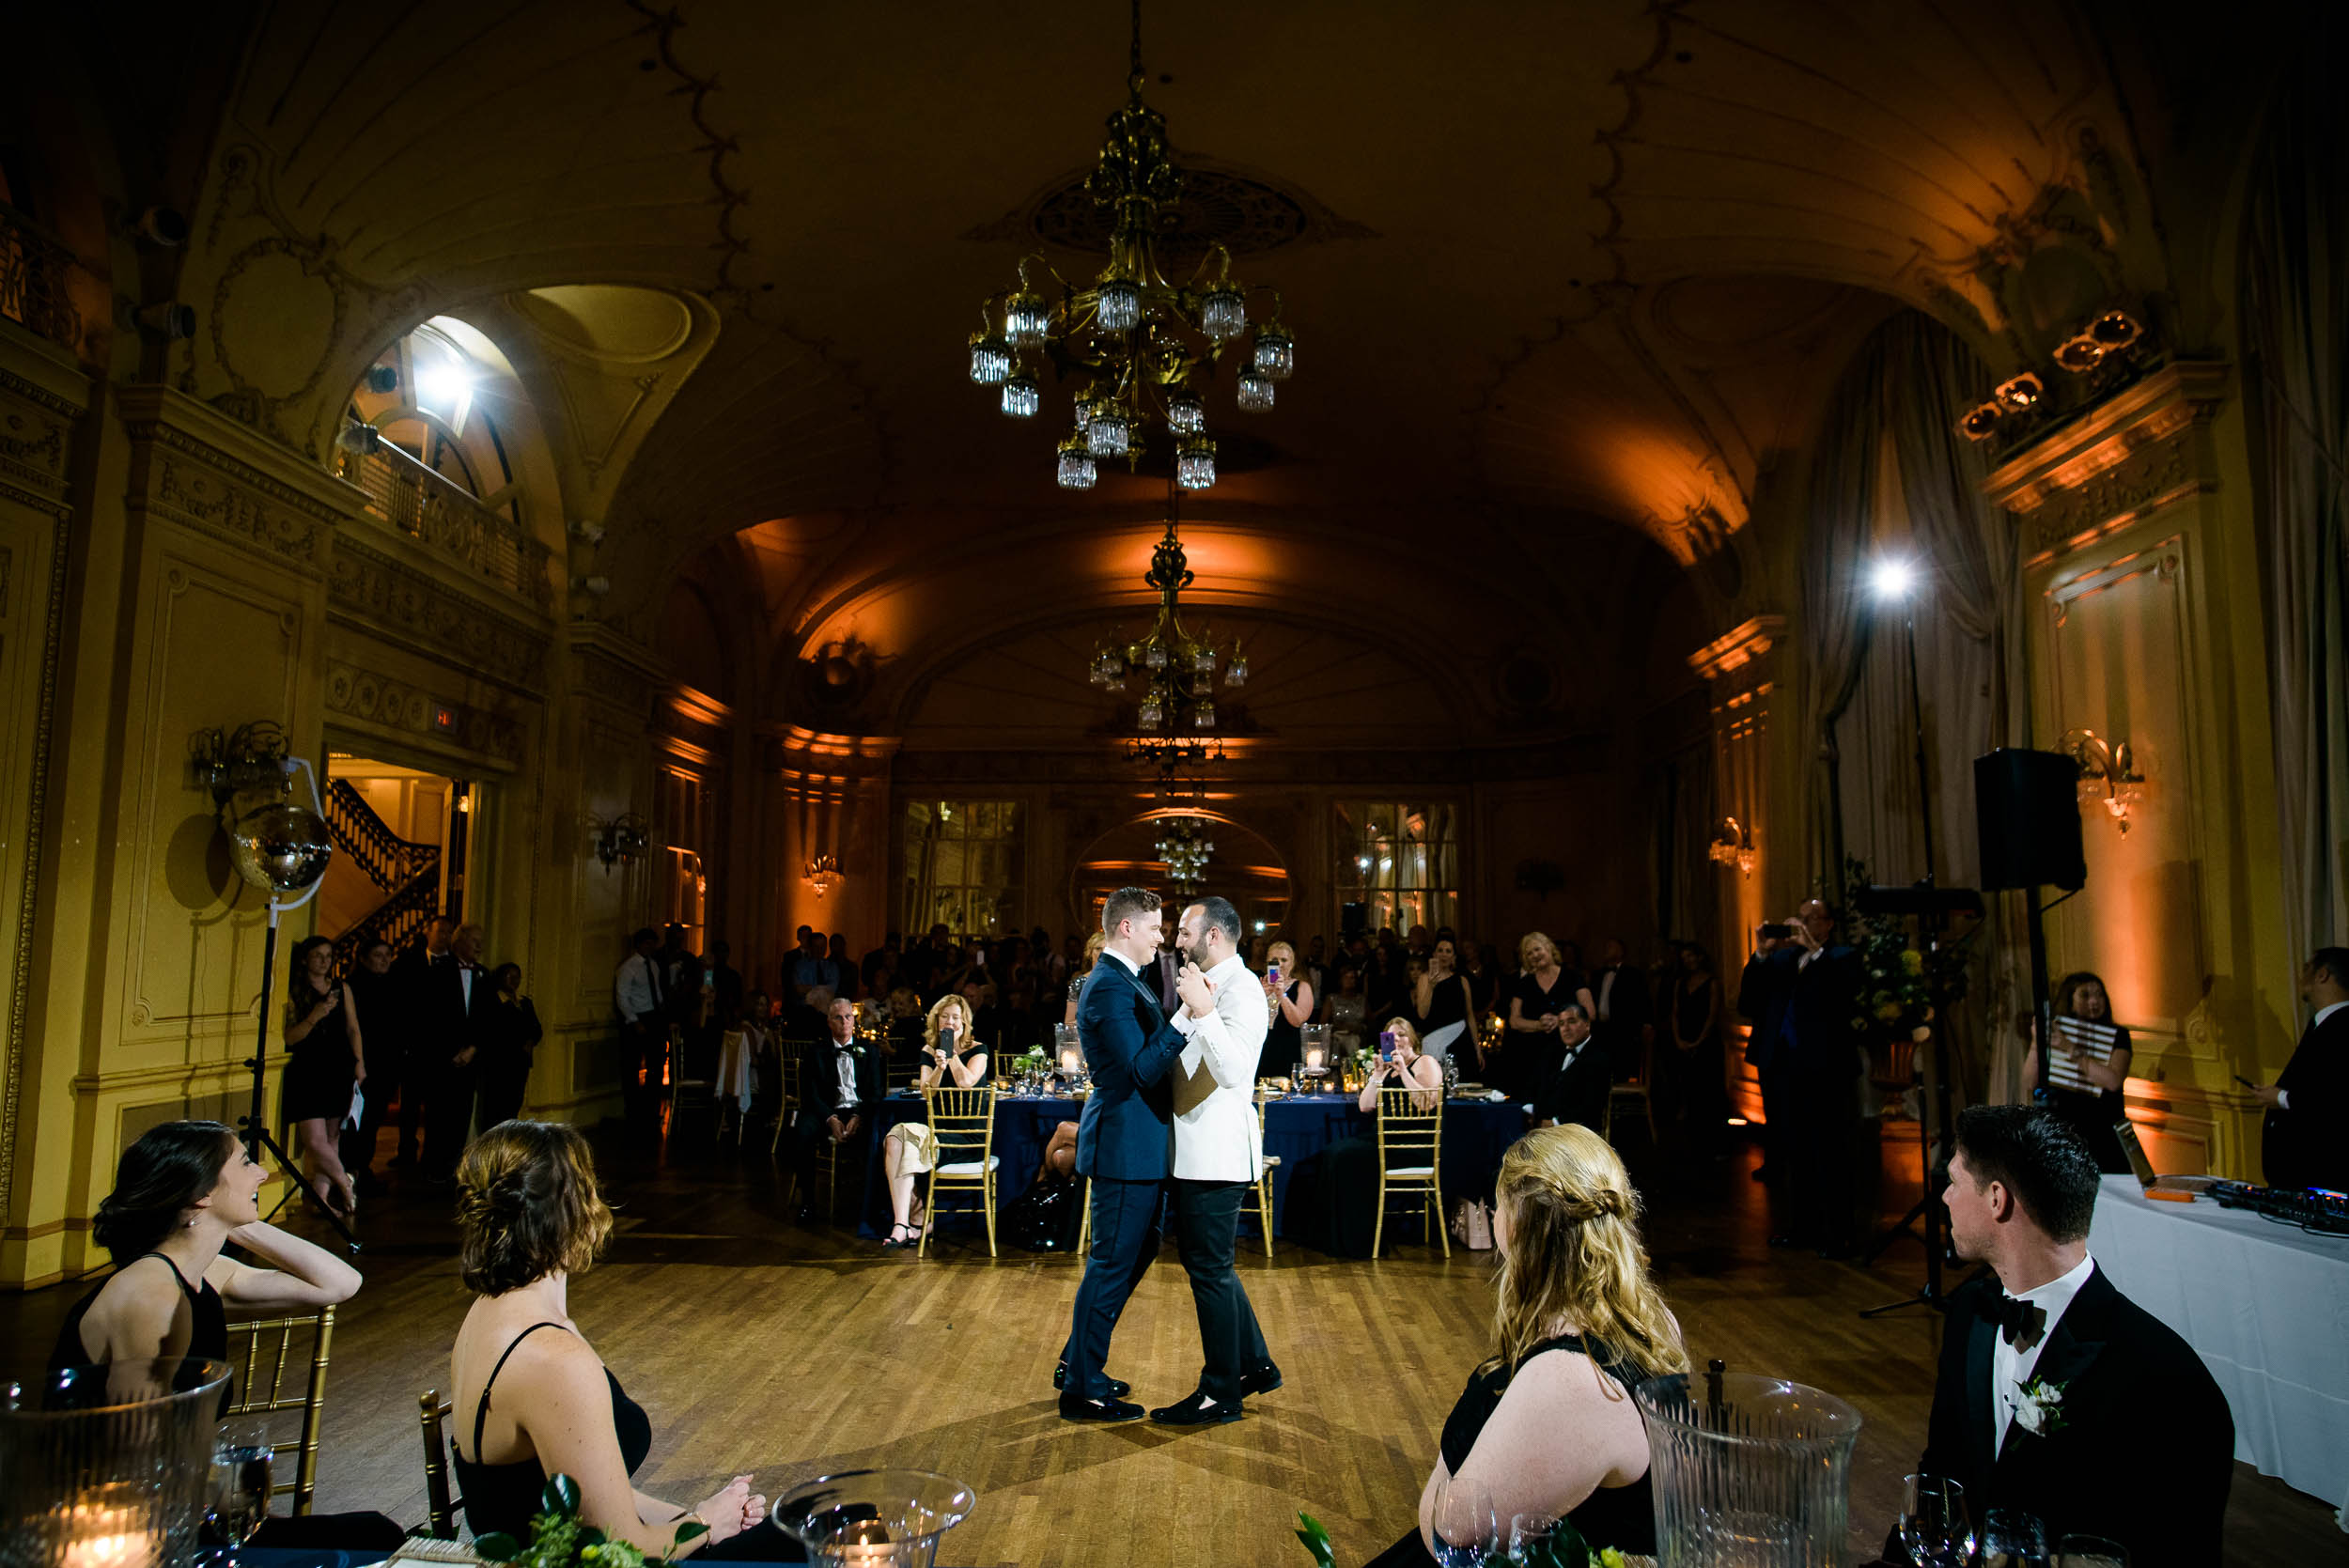 Grooms during first dance for luxurious fall wedding at the Chicago Symphony Center captured by J. Brown Photography. See more wedding ideas at jbrownphotography.com!